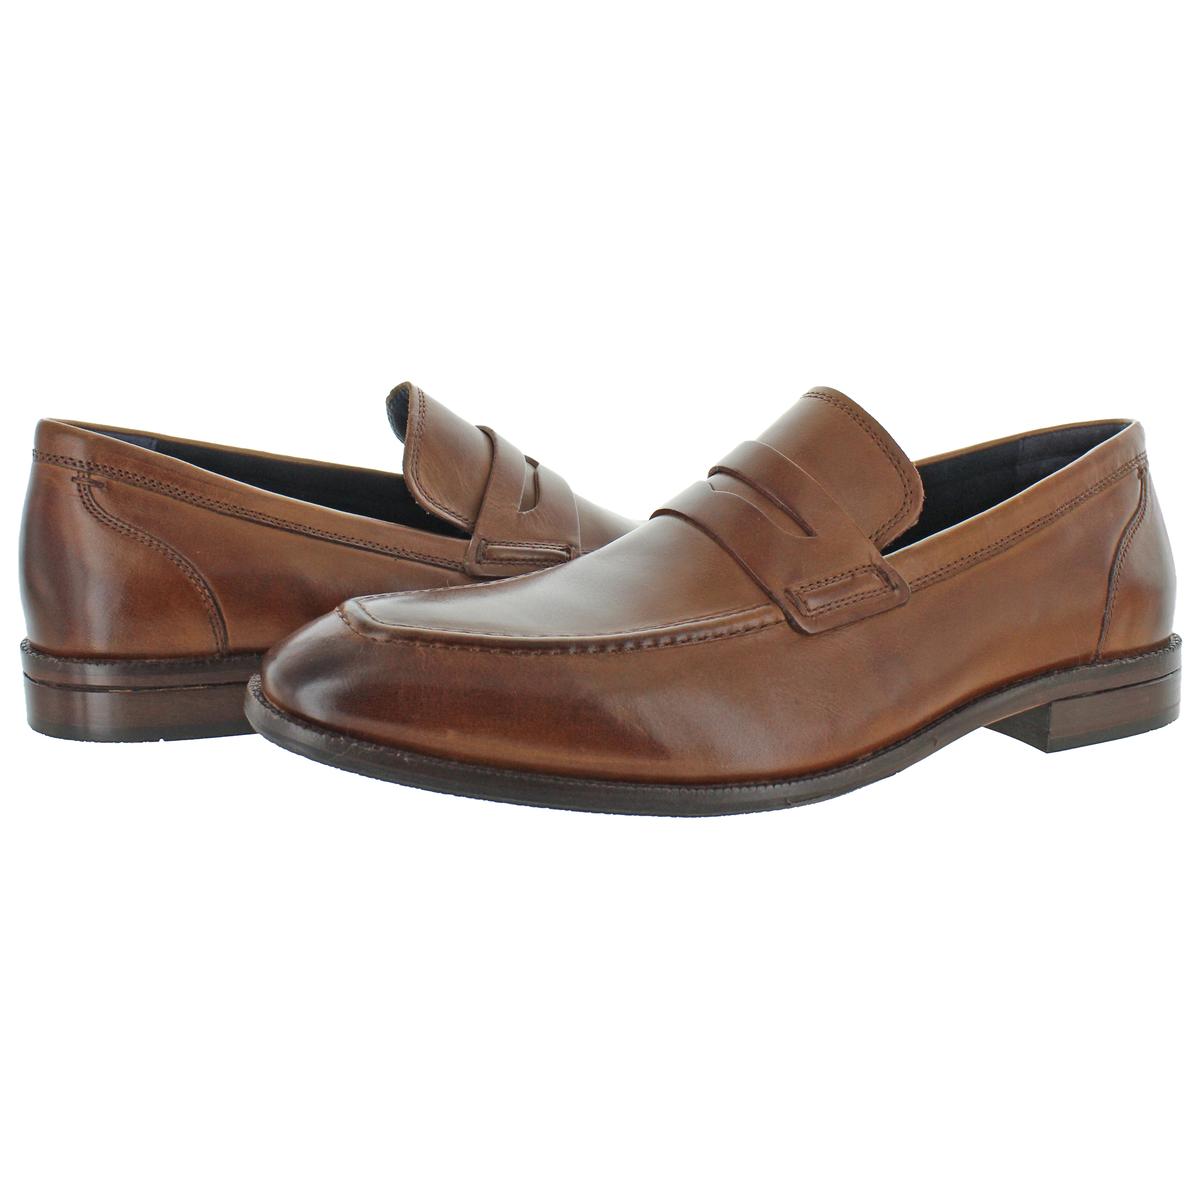 Cole Haan Mens Warner Tan Leather Penny Loafers Shoes 11 Wide (E) BHFO ...